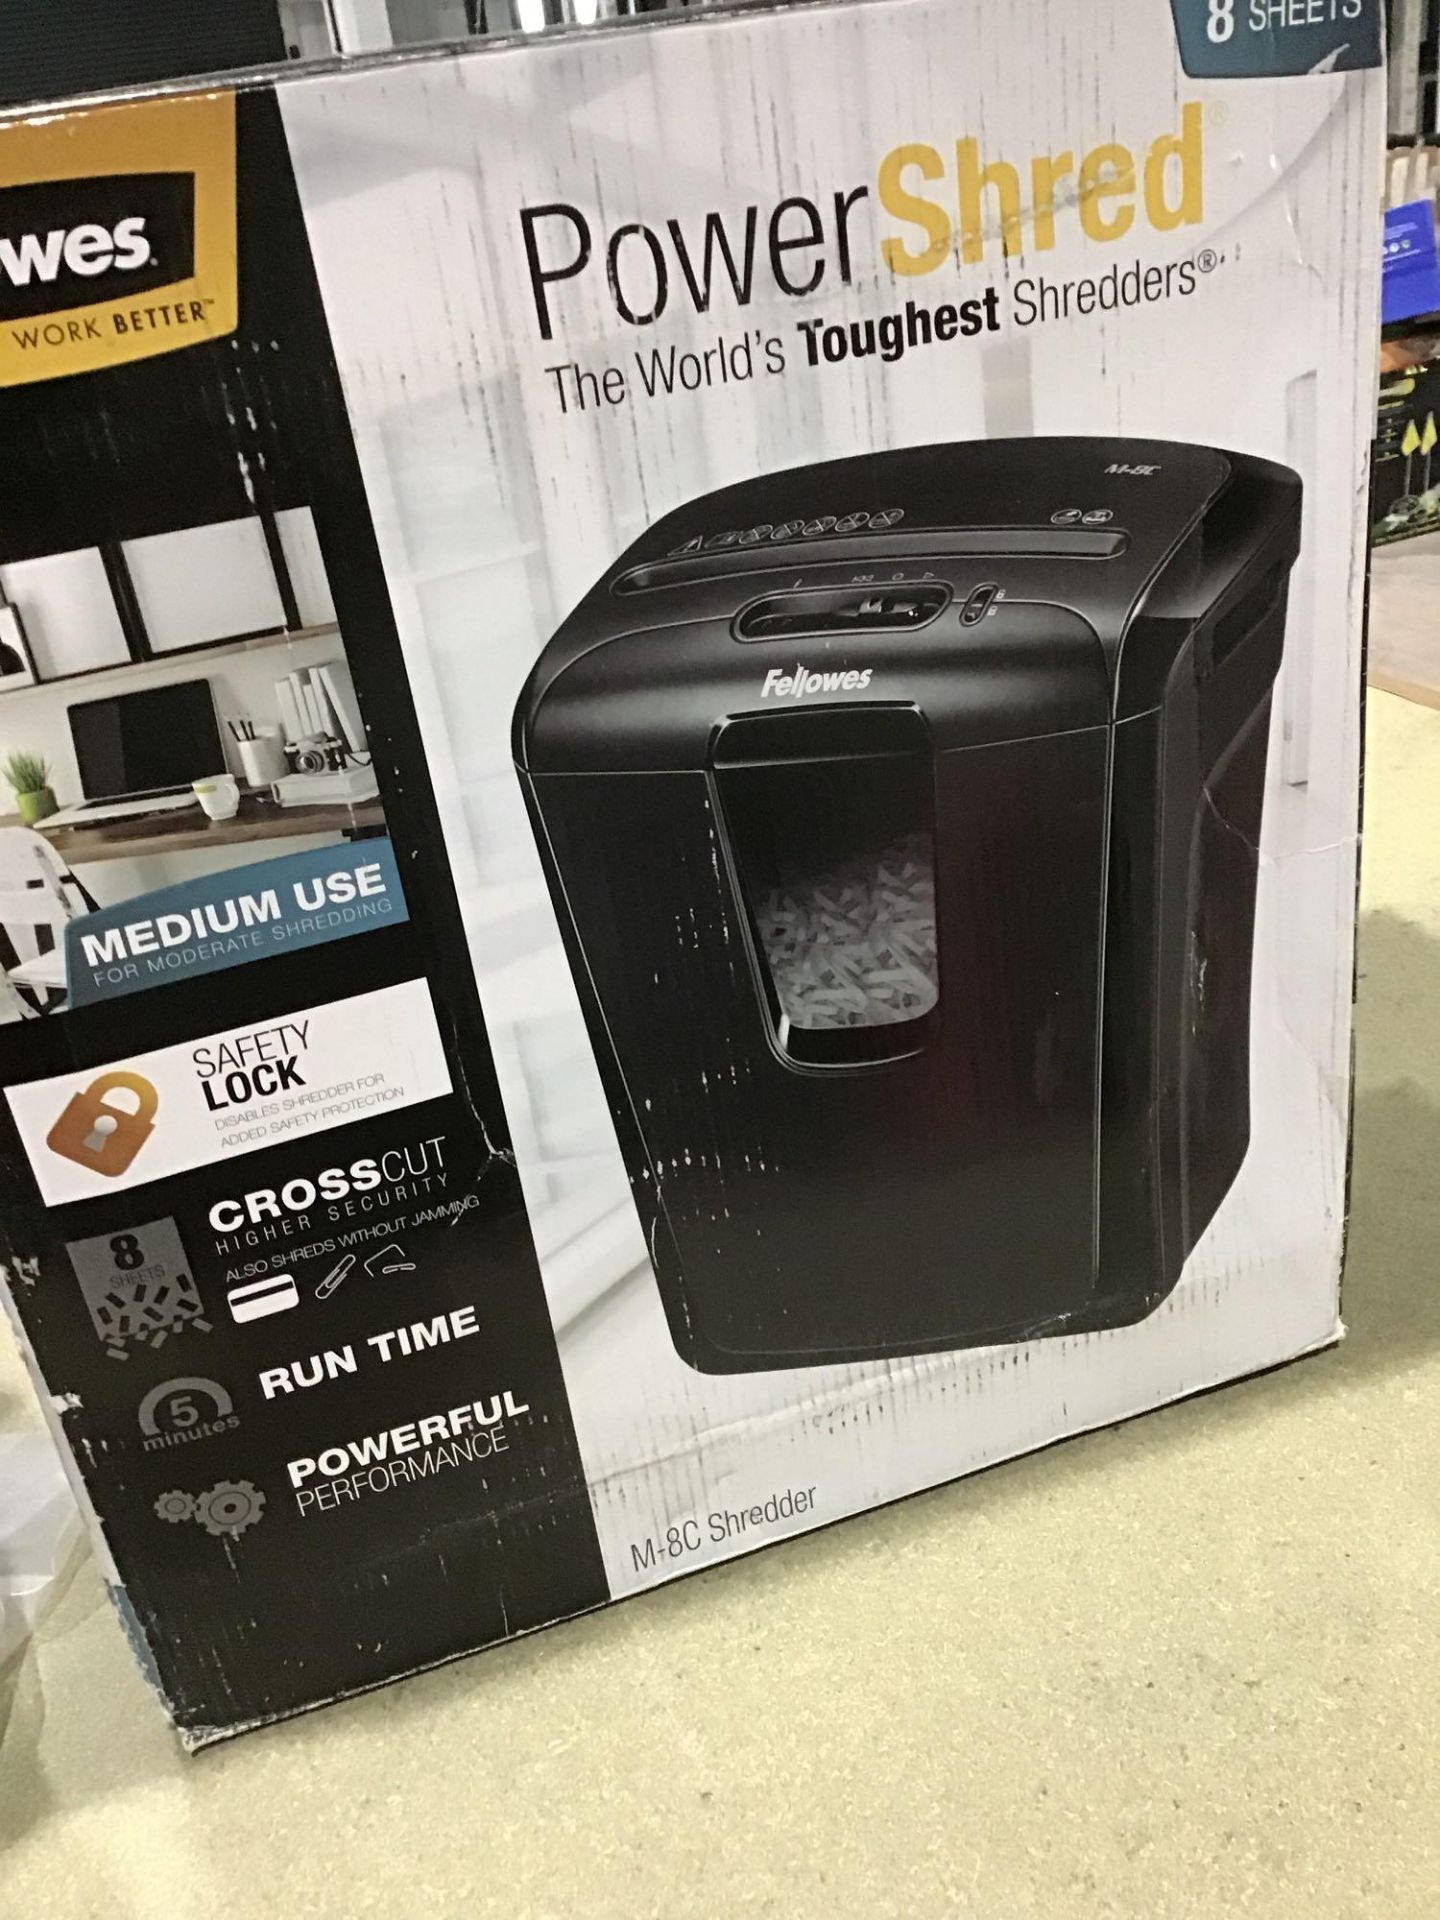 Fellowes Powershred M-8C 8 Sheet Cross Cut Personal Shredder With Safety Lock, Black £39.99 RRP - Image 3 of 4